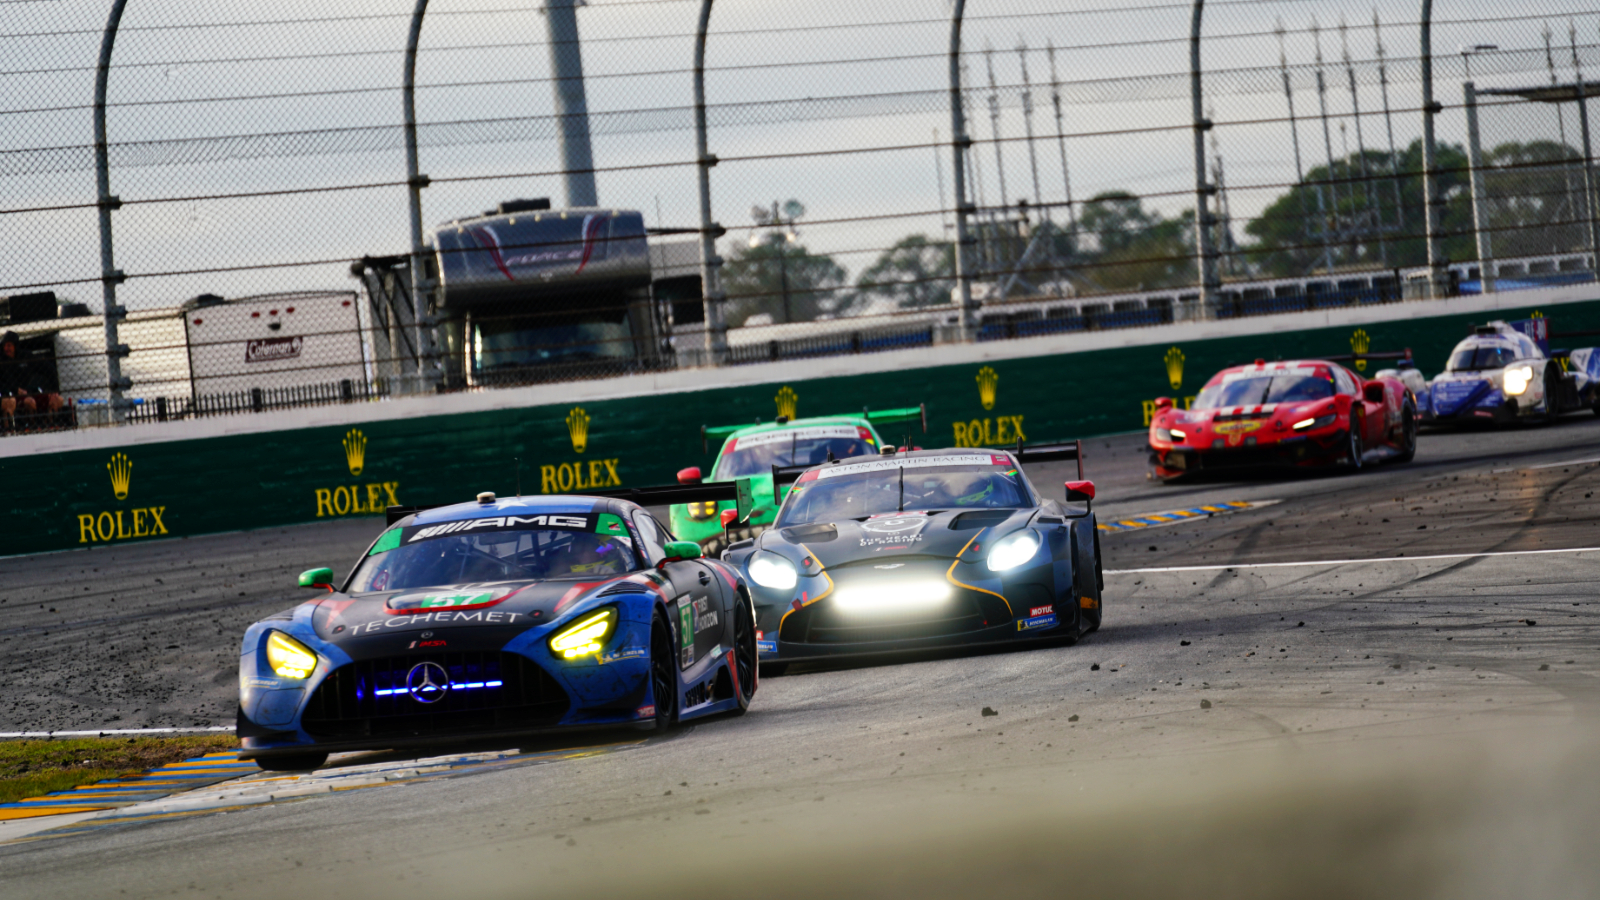 Triumphant Victory: Winward Racing&#8217;s Mercedes Emerges Triumphant in the Battle for GTD at the Prestigious Daytona 24